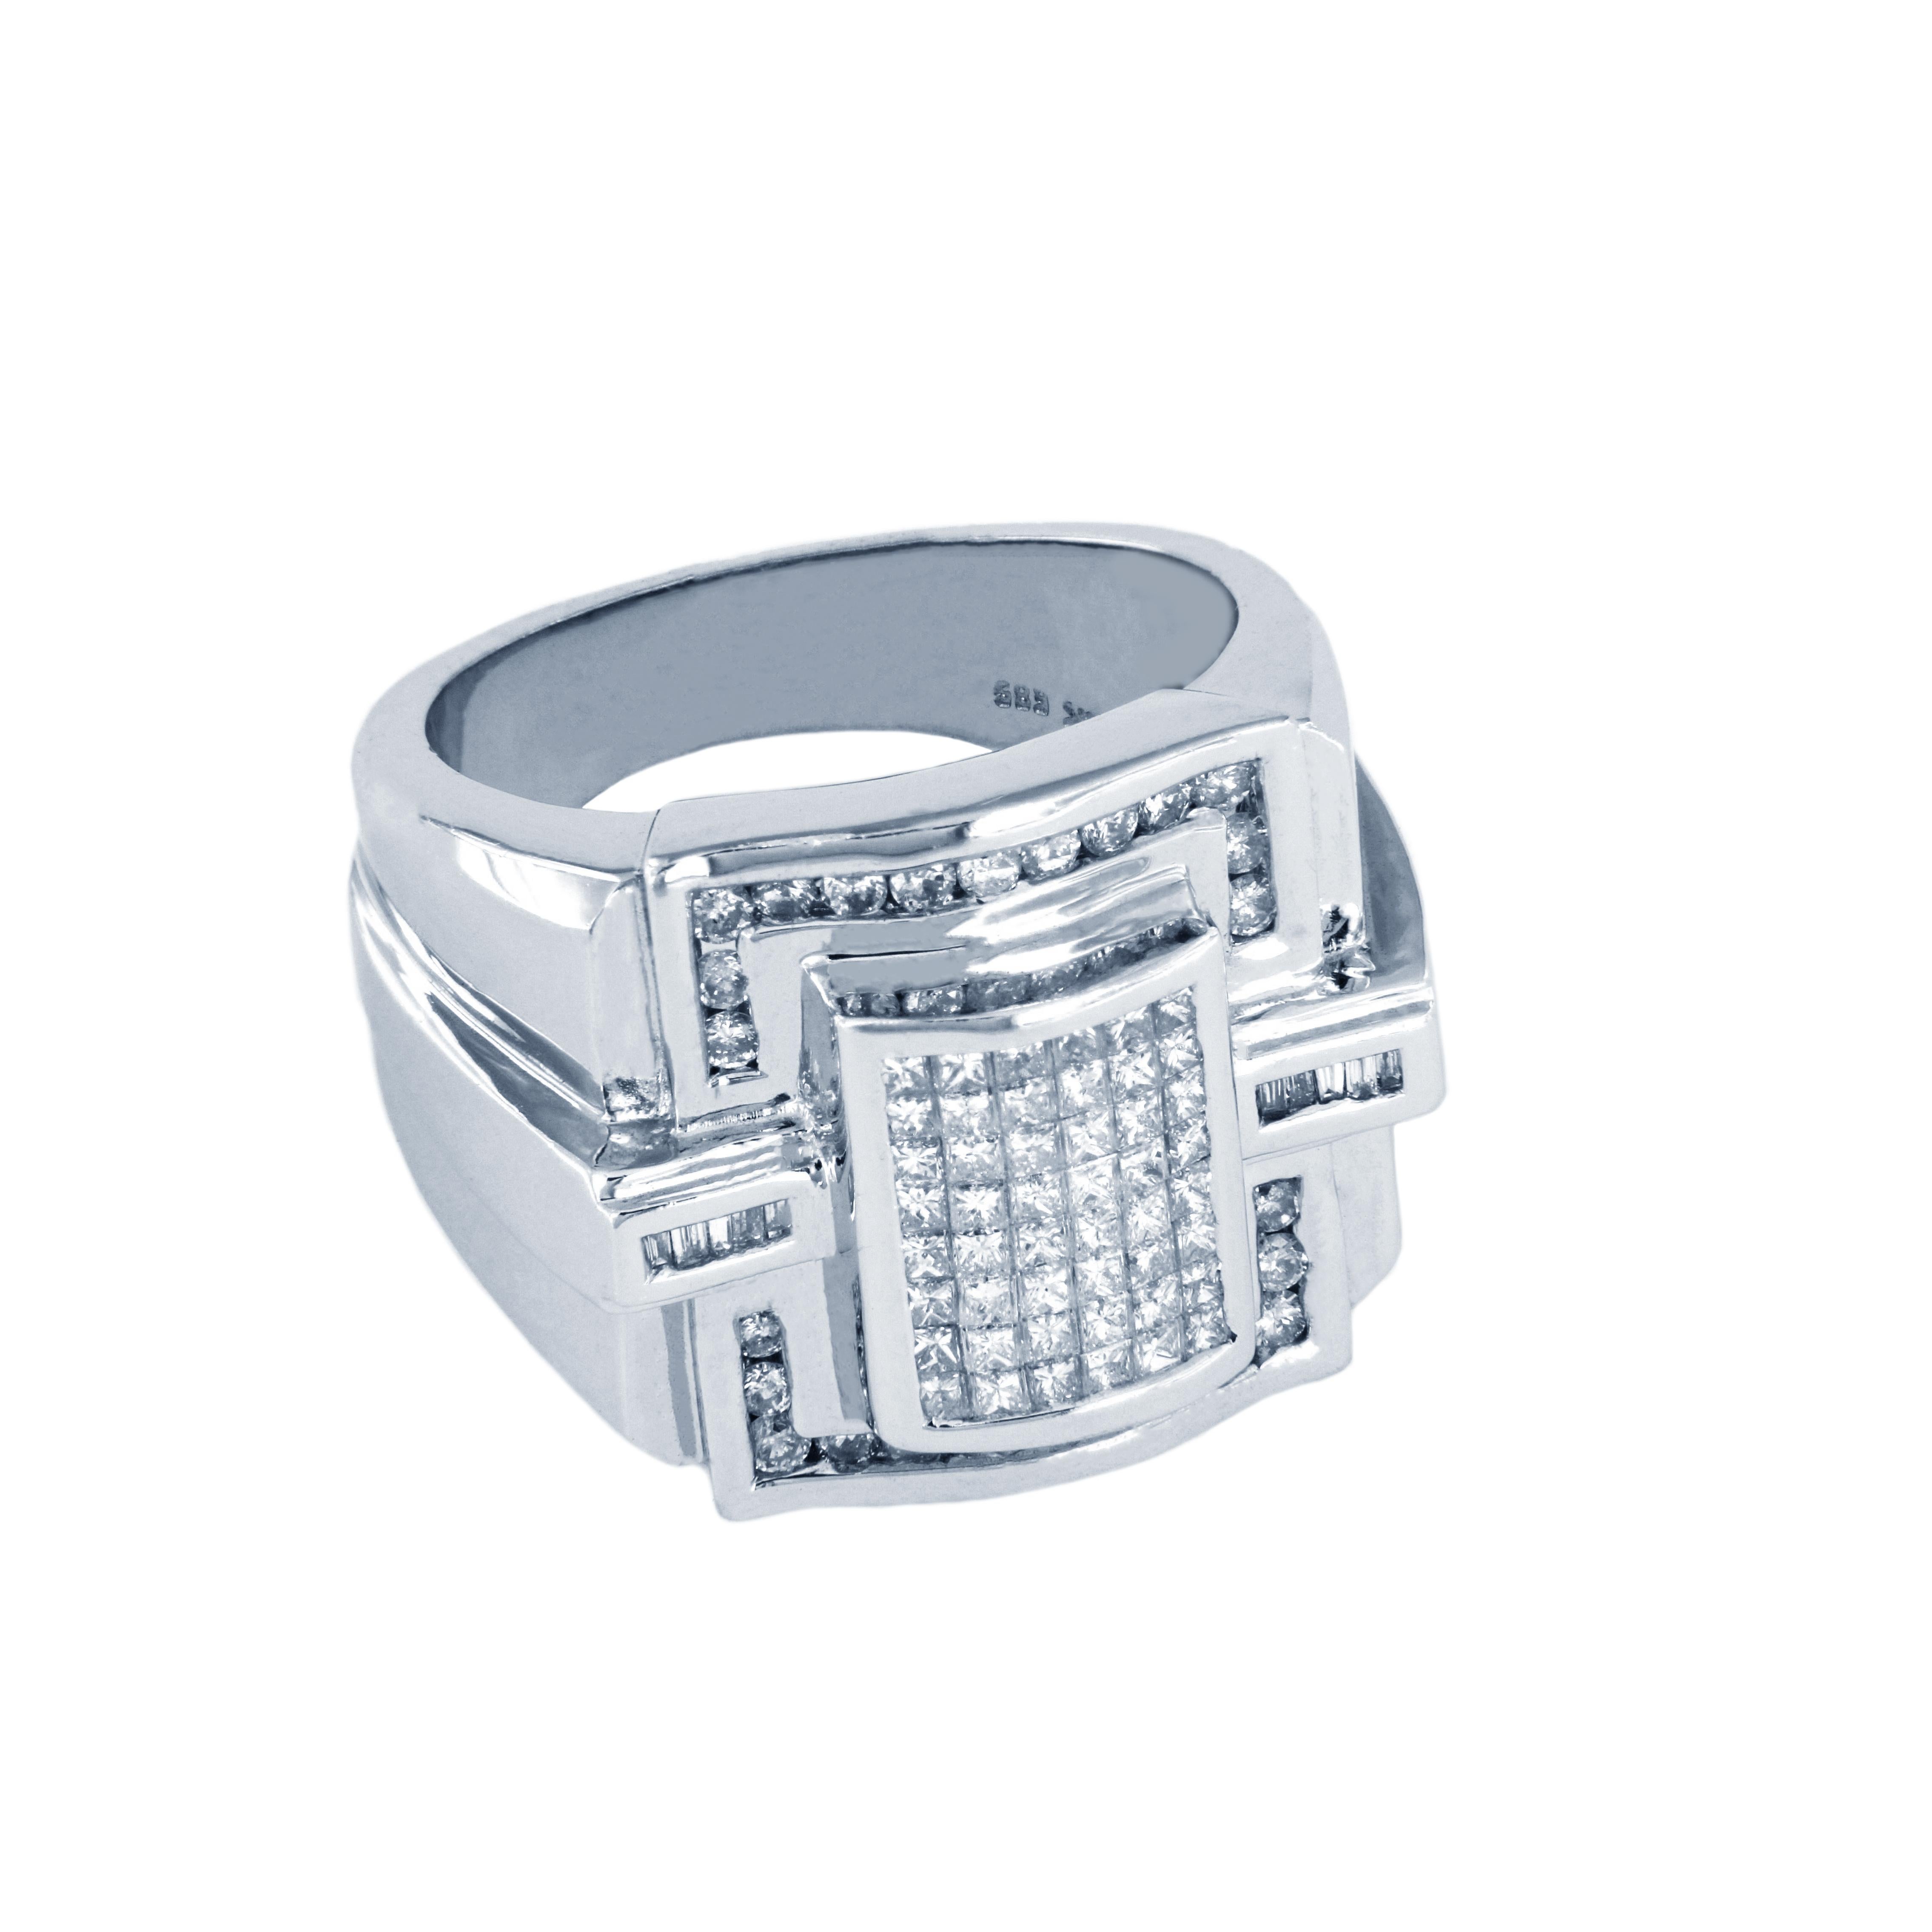 -Custom made

-14k White gold

-Ring size: 9.5

-Weight:17.7gr

-Ornament dimensioin: 0.6x0.8’’

-Diamond: 2.2ct, SI clarity, G color